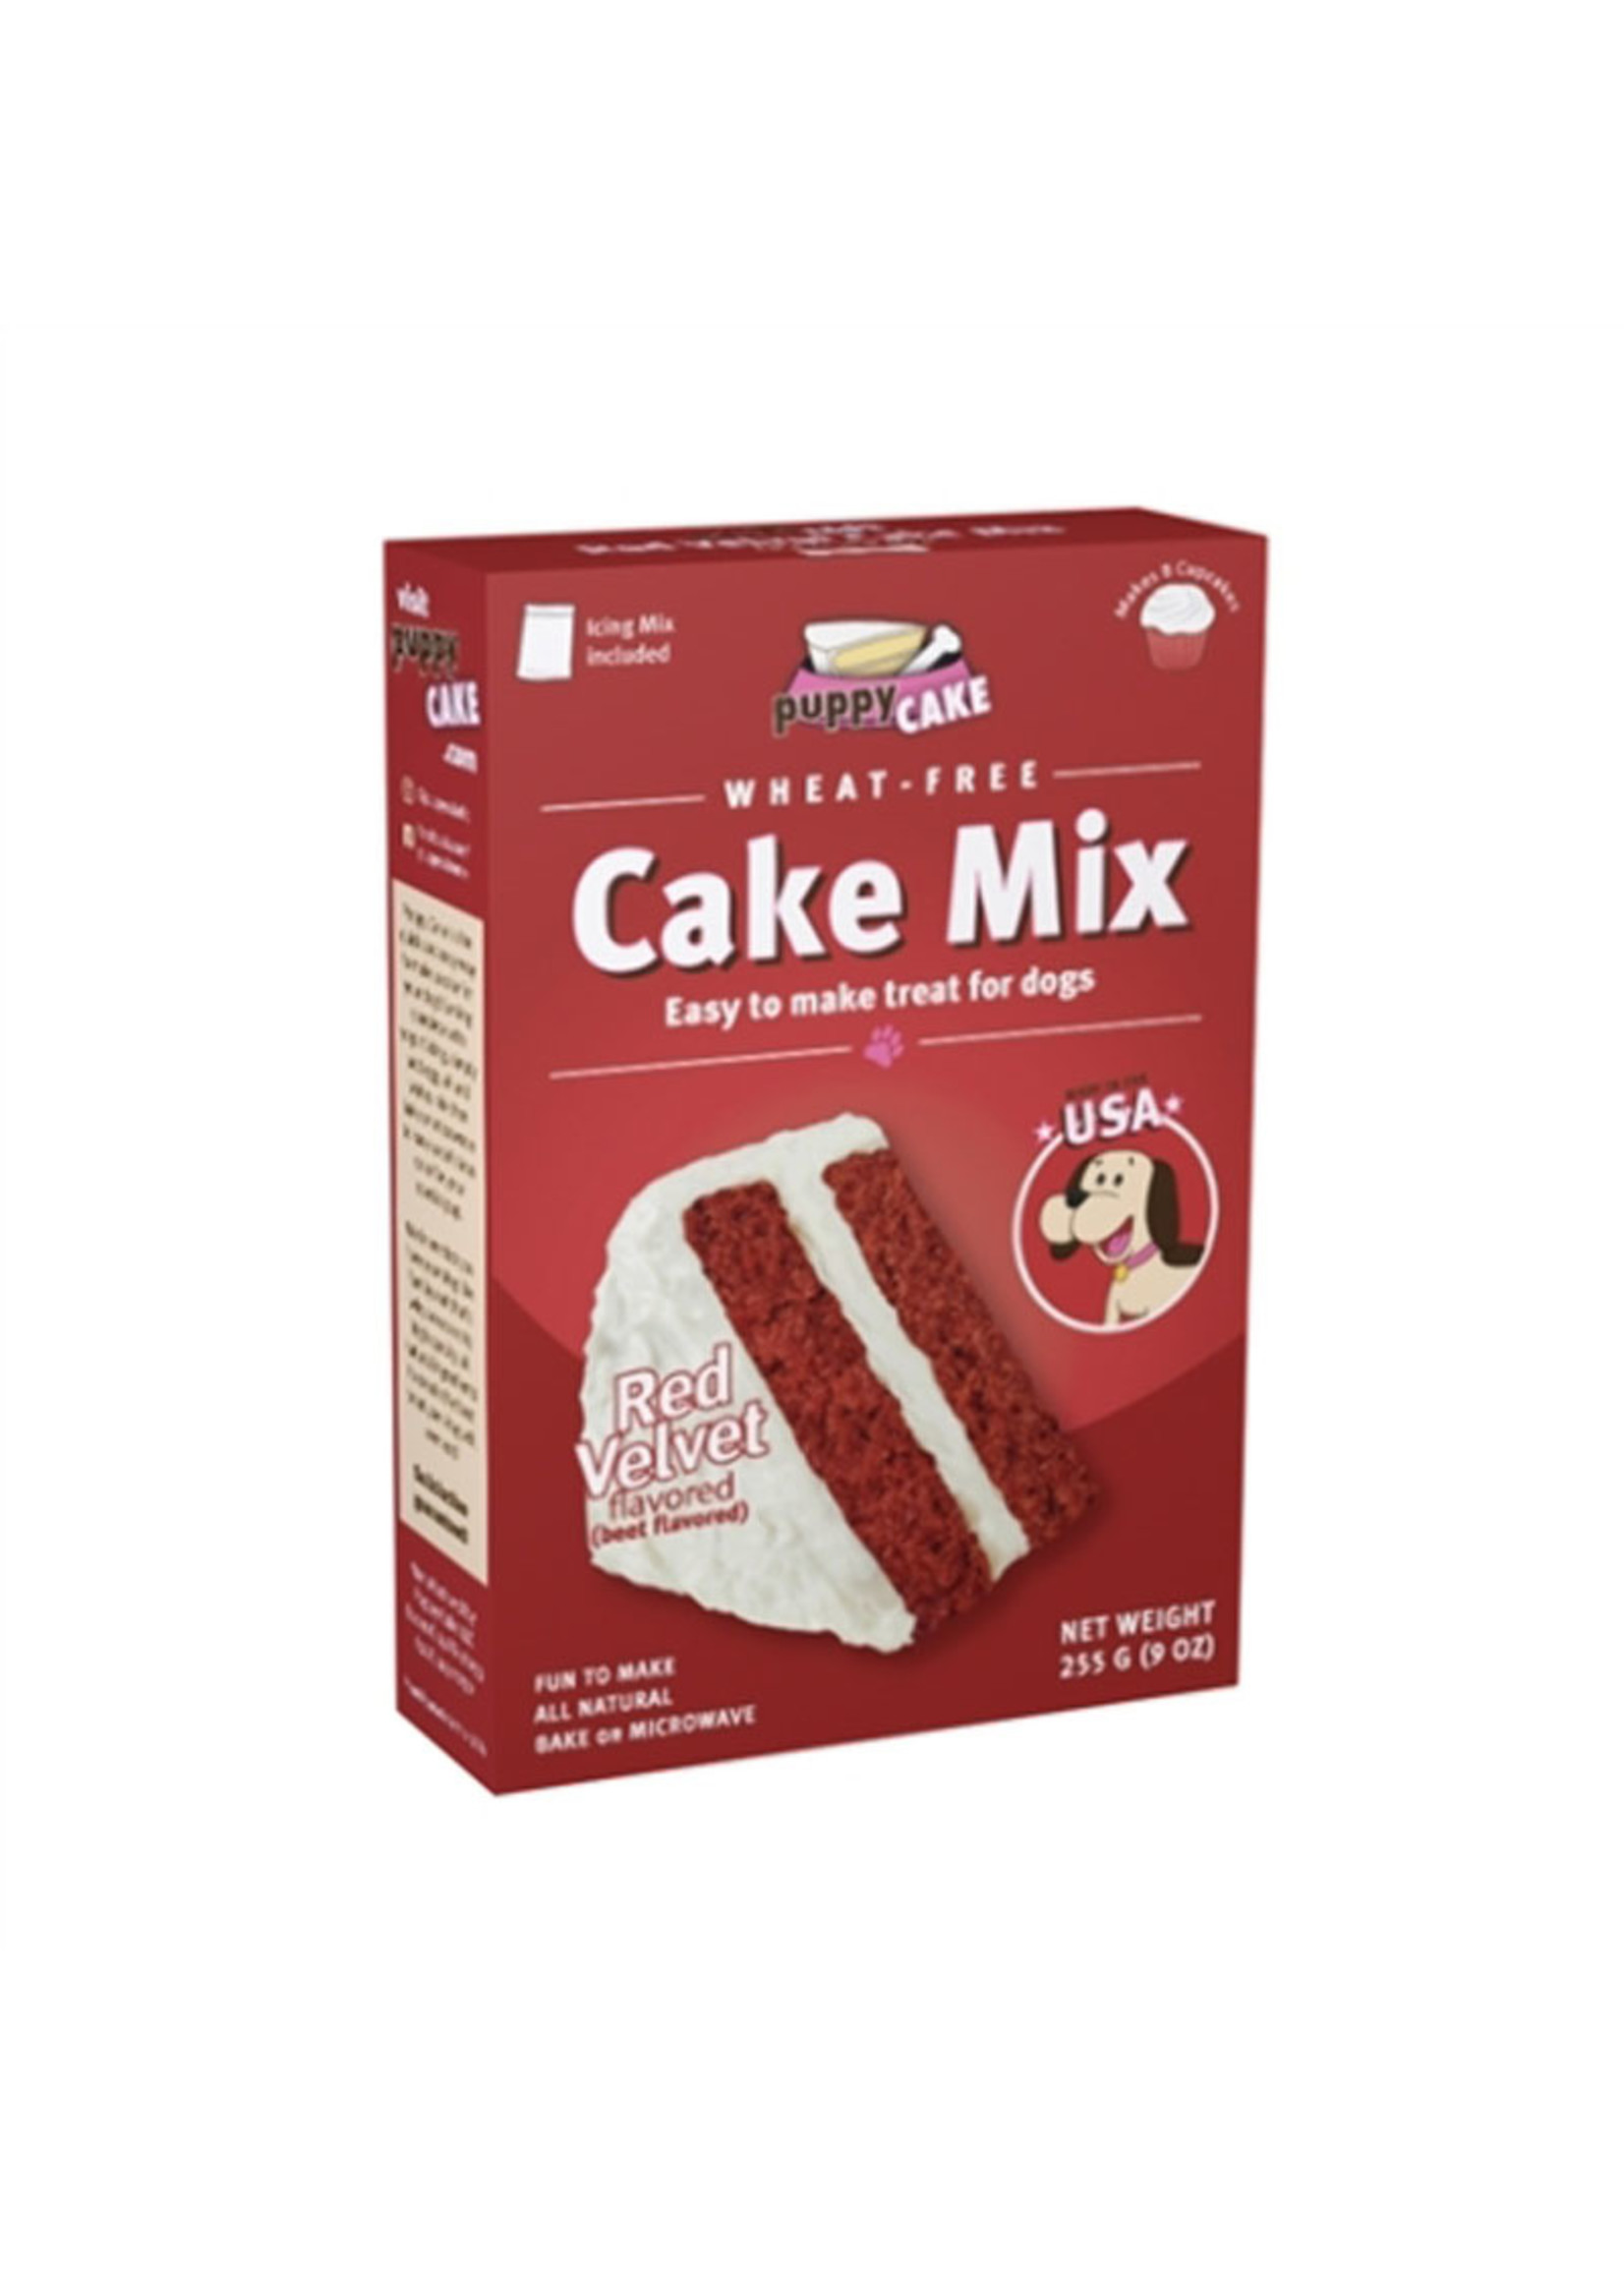 Puppy Cake Cake Mix 9 oz Red Velvet Flavored Wheat Free